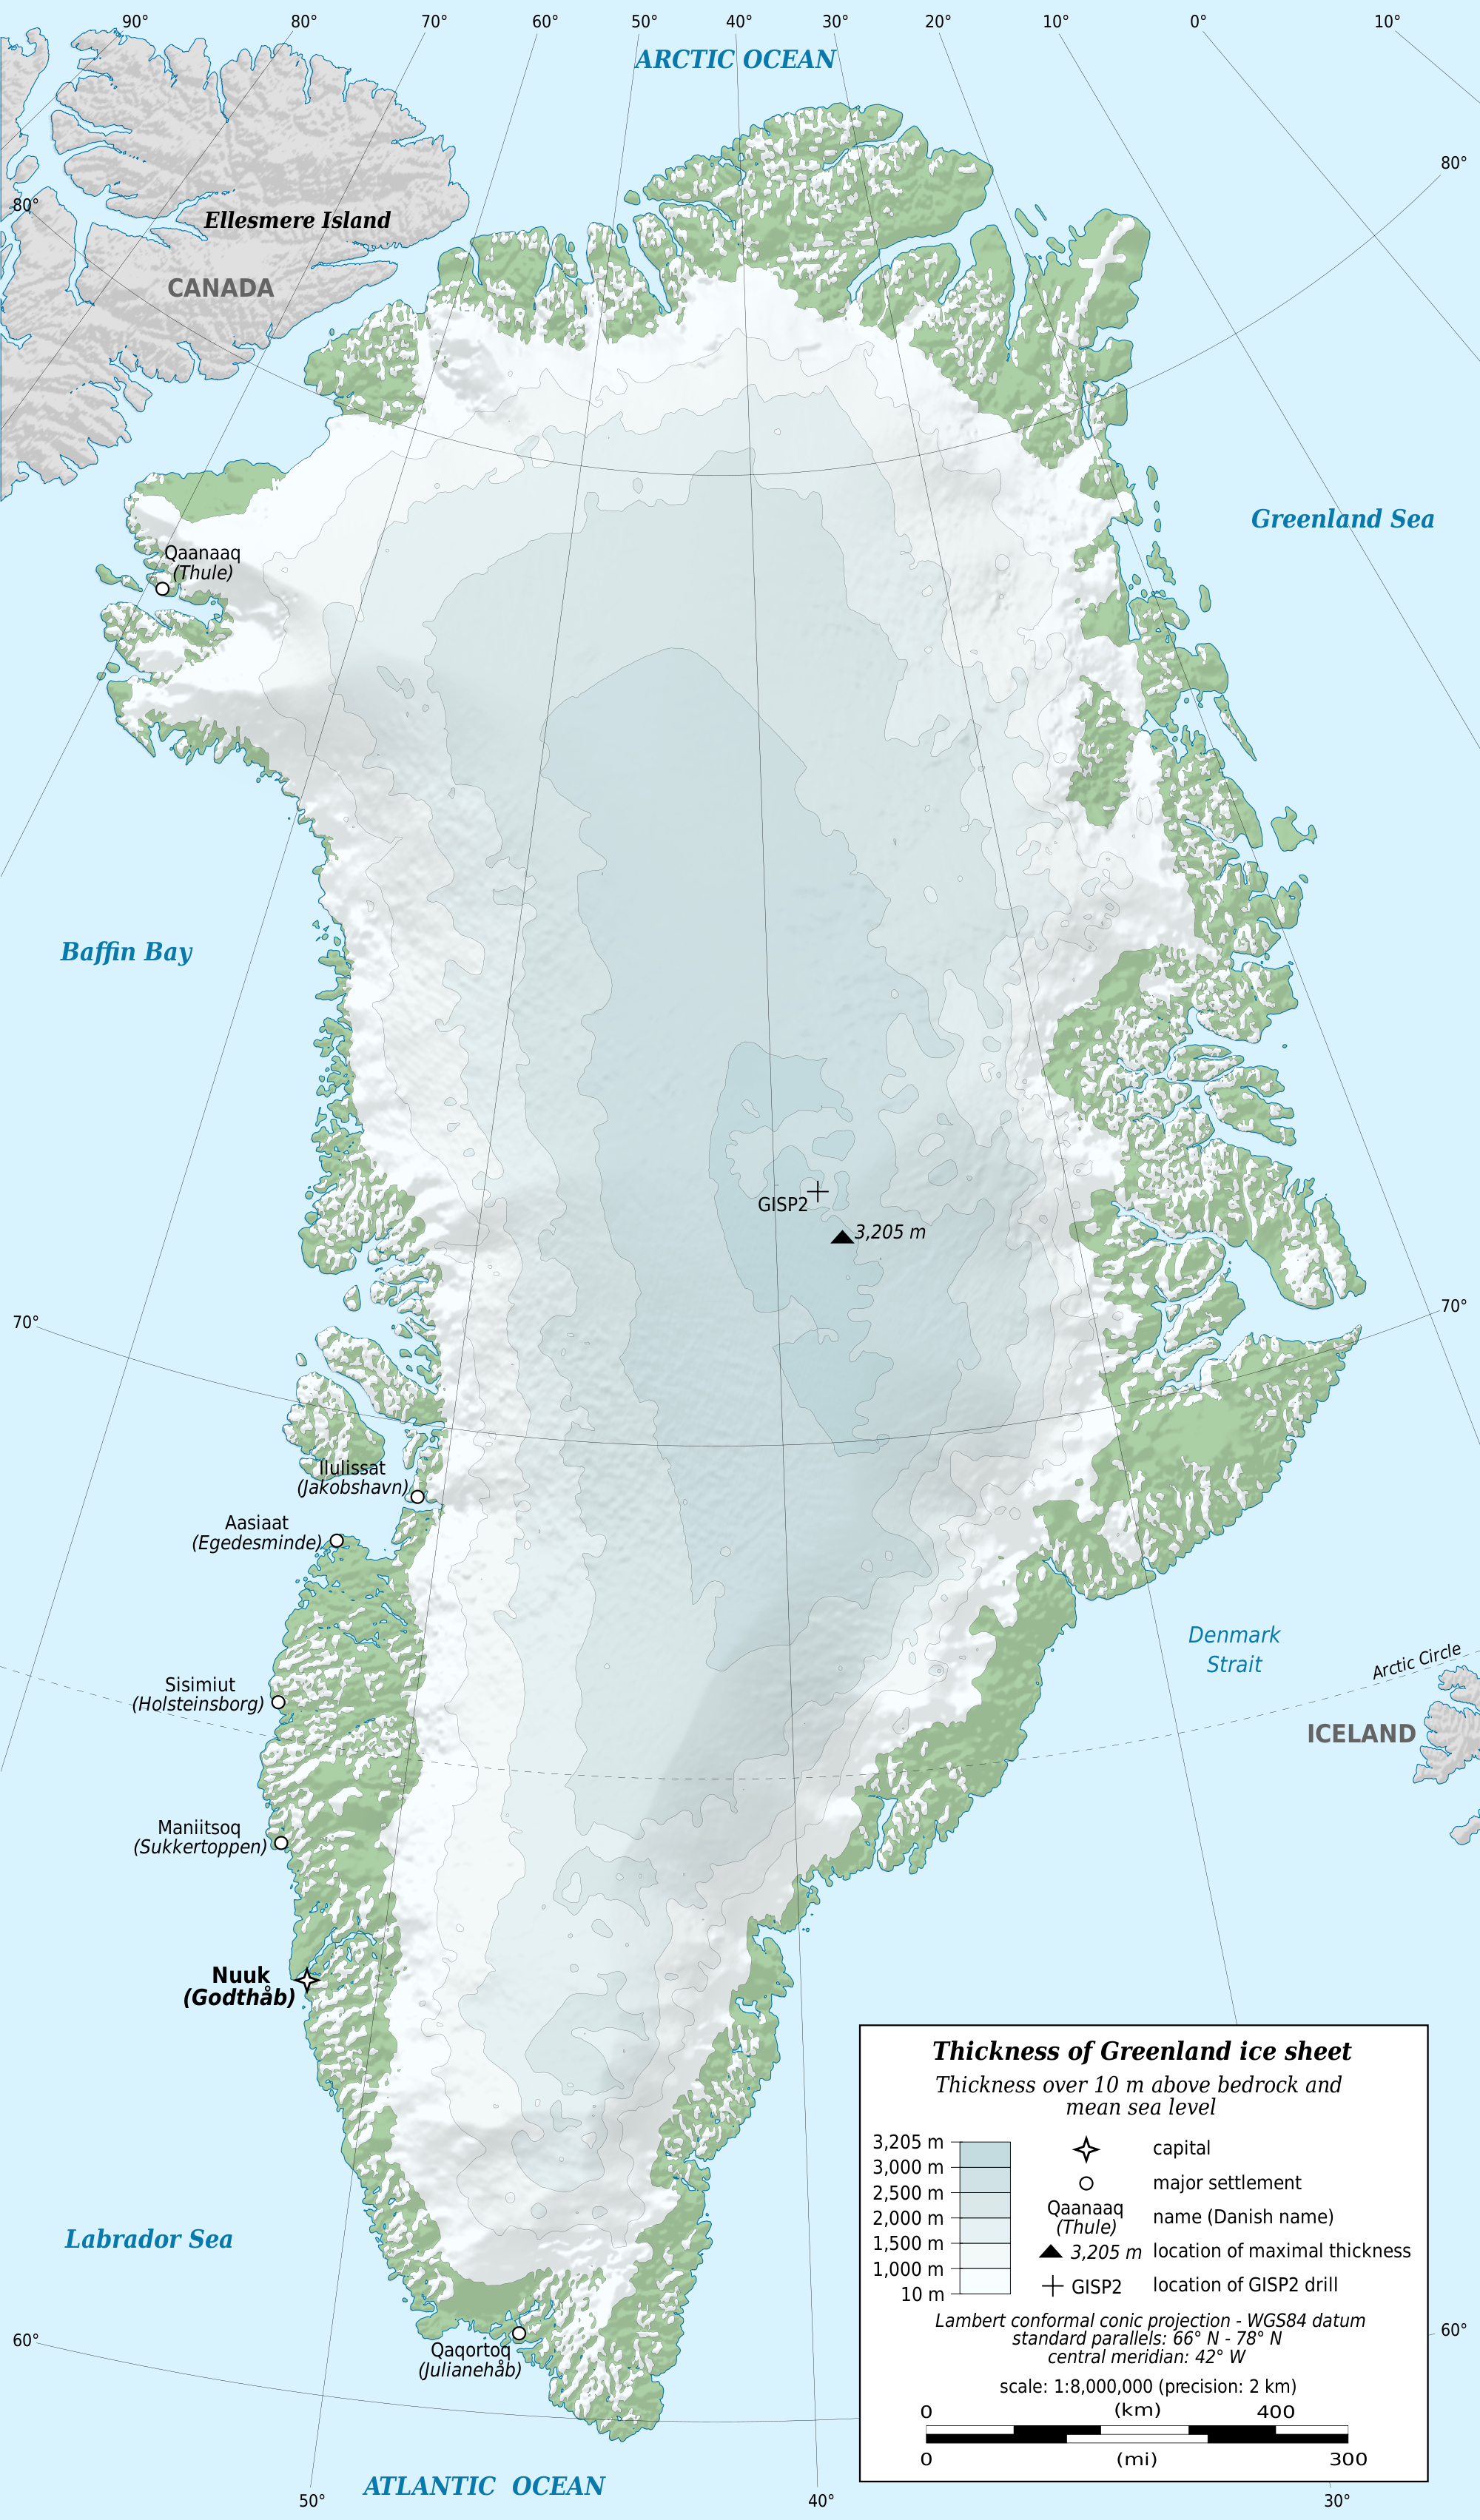 Map of Greenland showing the thickness of the ice sheet that covers nearly the entire country. The ice is thickest near the center of Greenland with a maximum thickness of 3,205 meters and gets thinner outward toward the coasts.